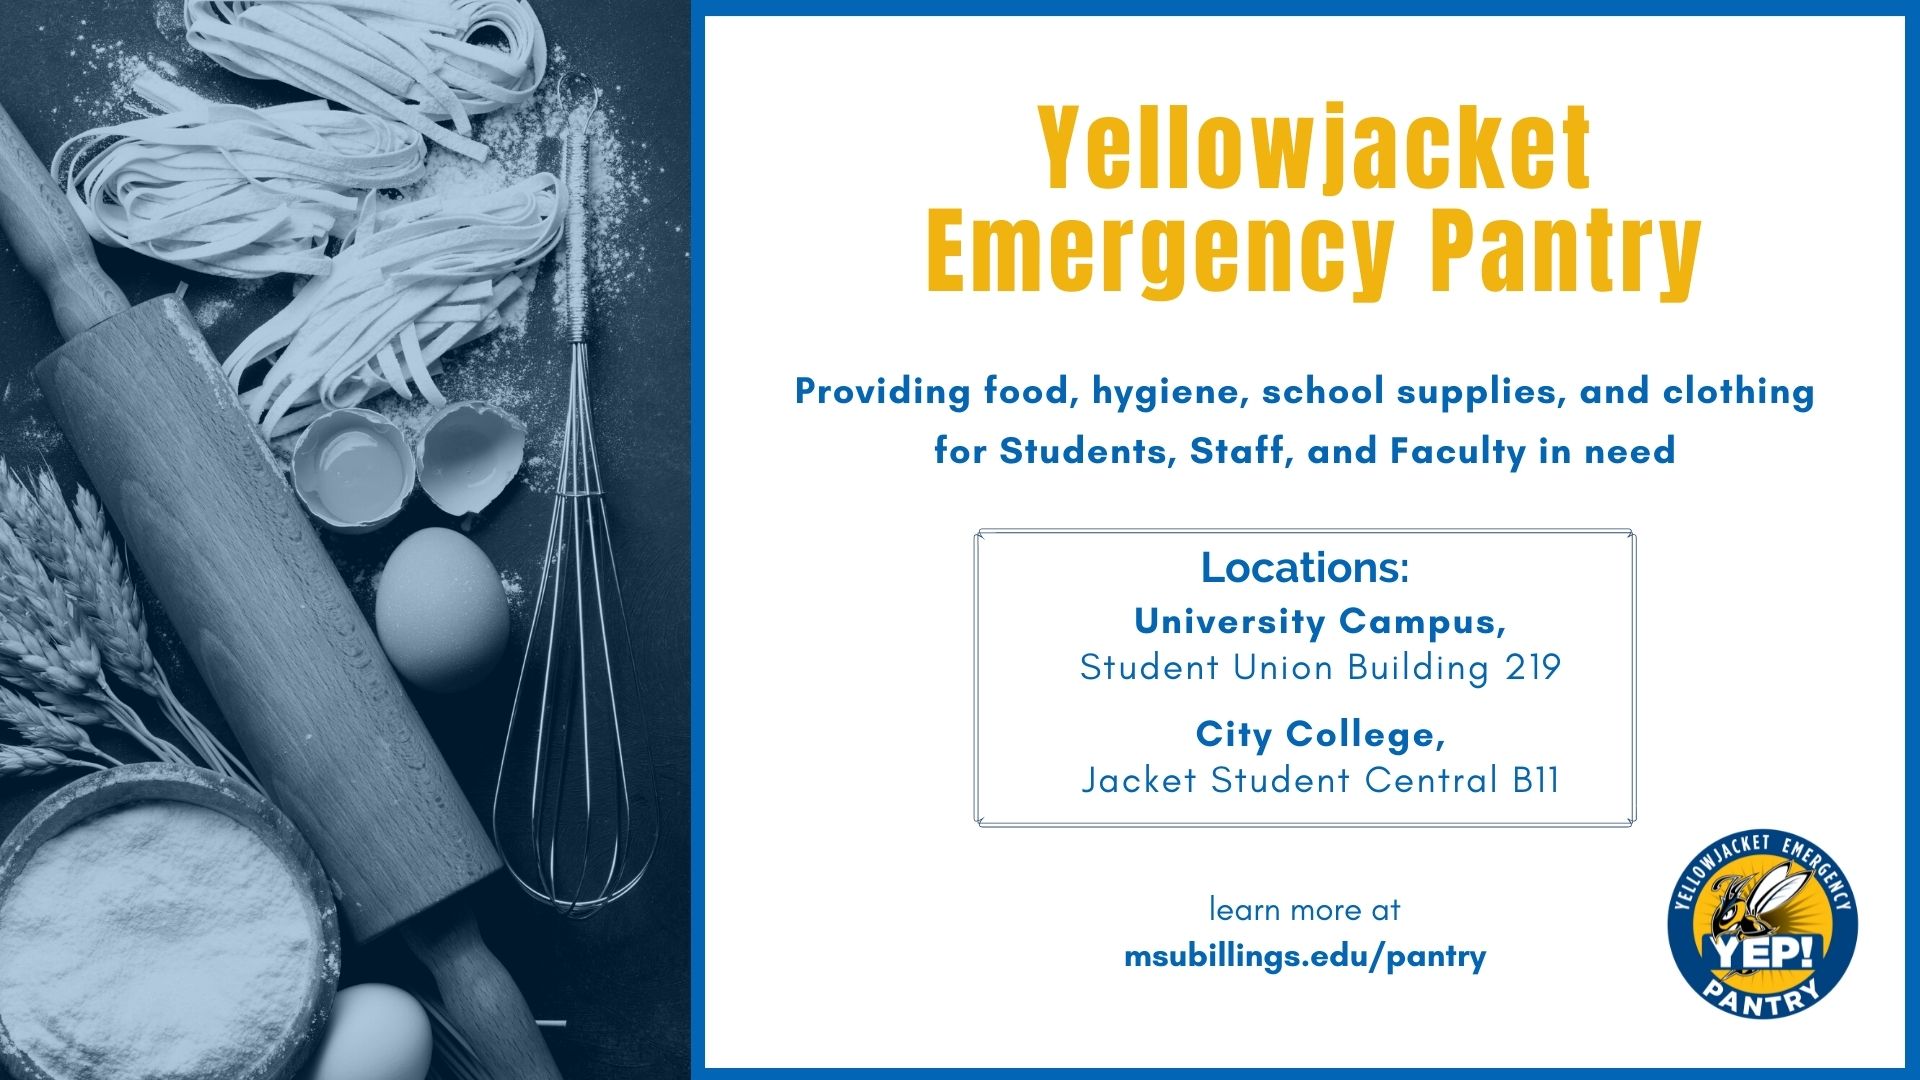 Yellowjacket Emergency Pantry. Providing food, hygiene, school supplies, and clothing for Students, Staff, and Faculty in need. Locations: University Campus, Student Union Building 219  City College, Jacket Student Central B11. Learn More at msubillings.edu/pantry